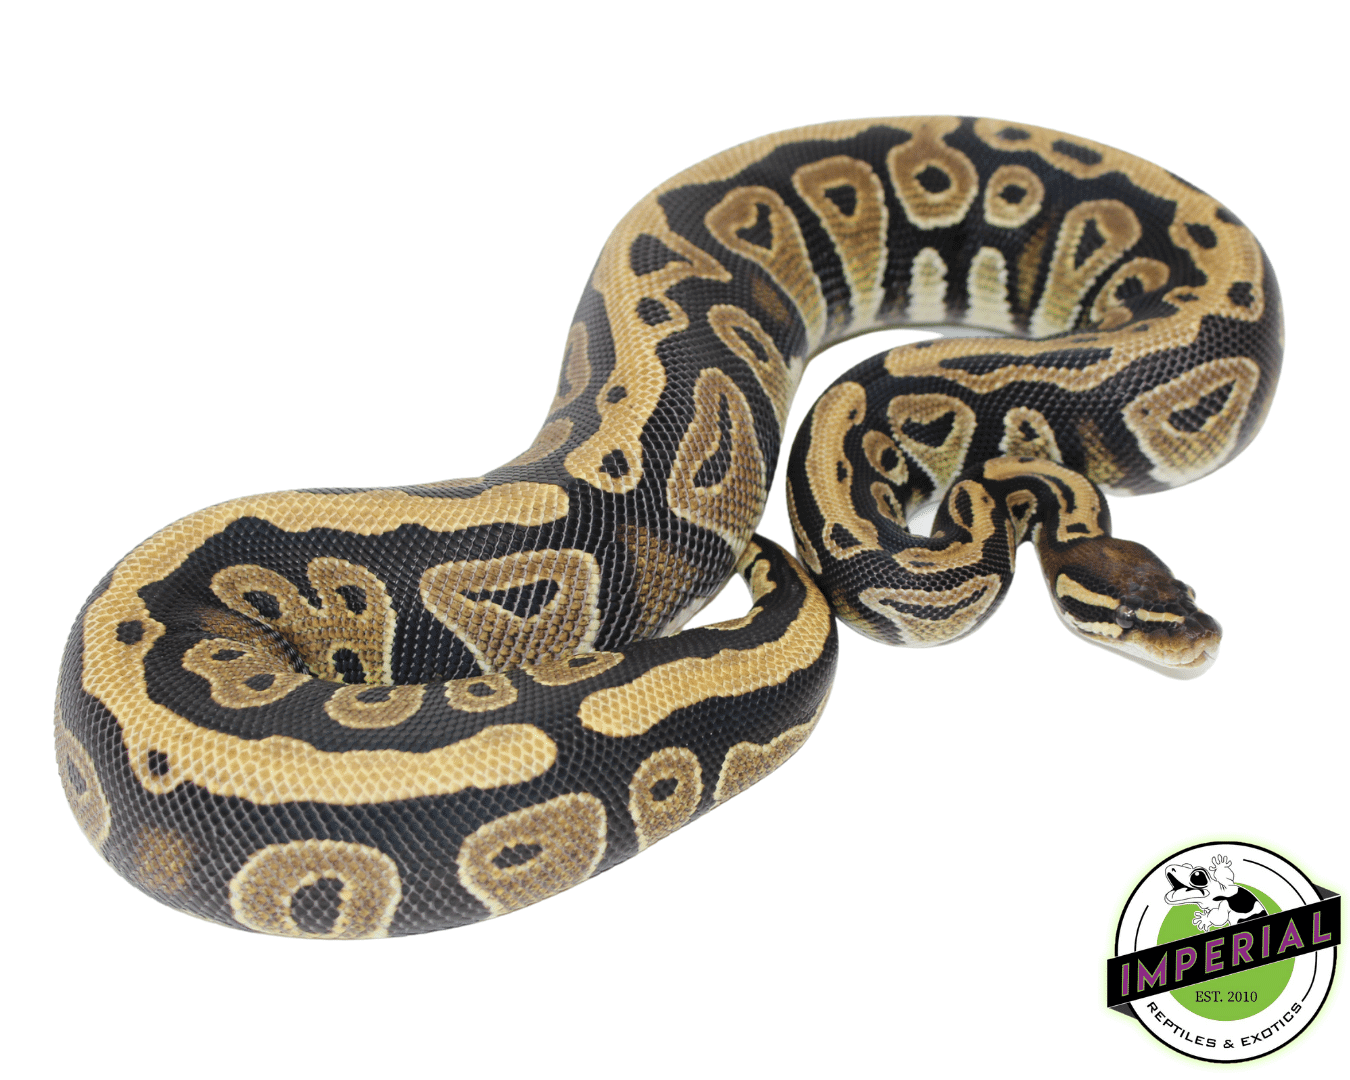 cypress ball python for sale, buy reptiles online